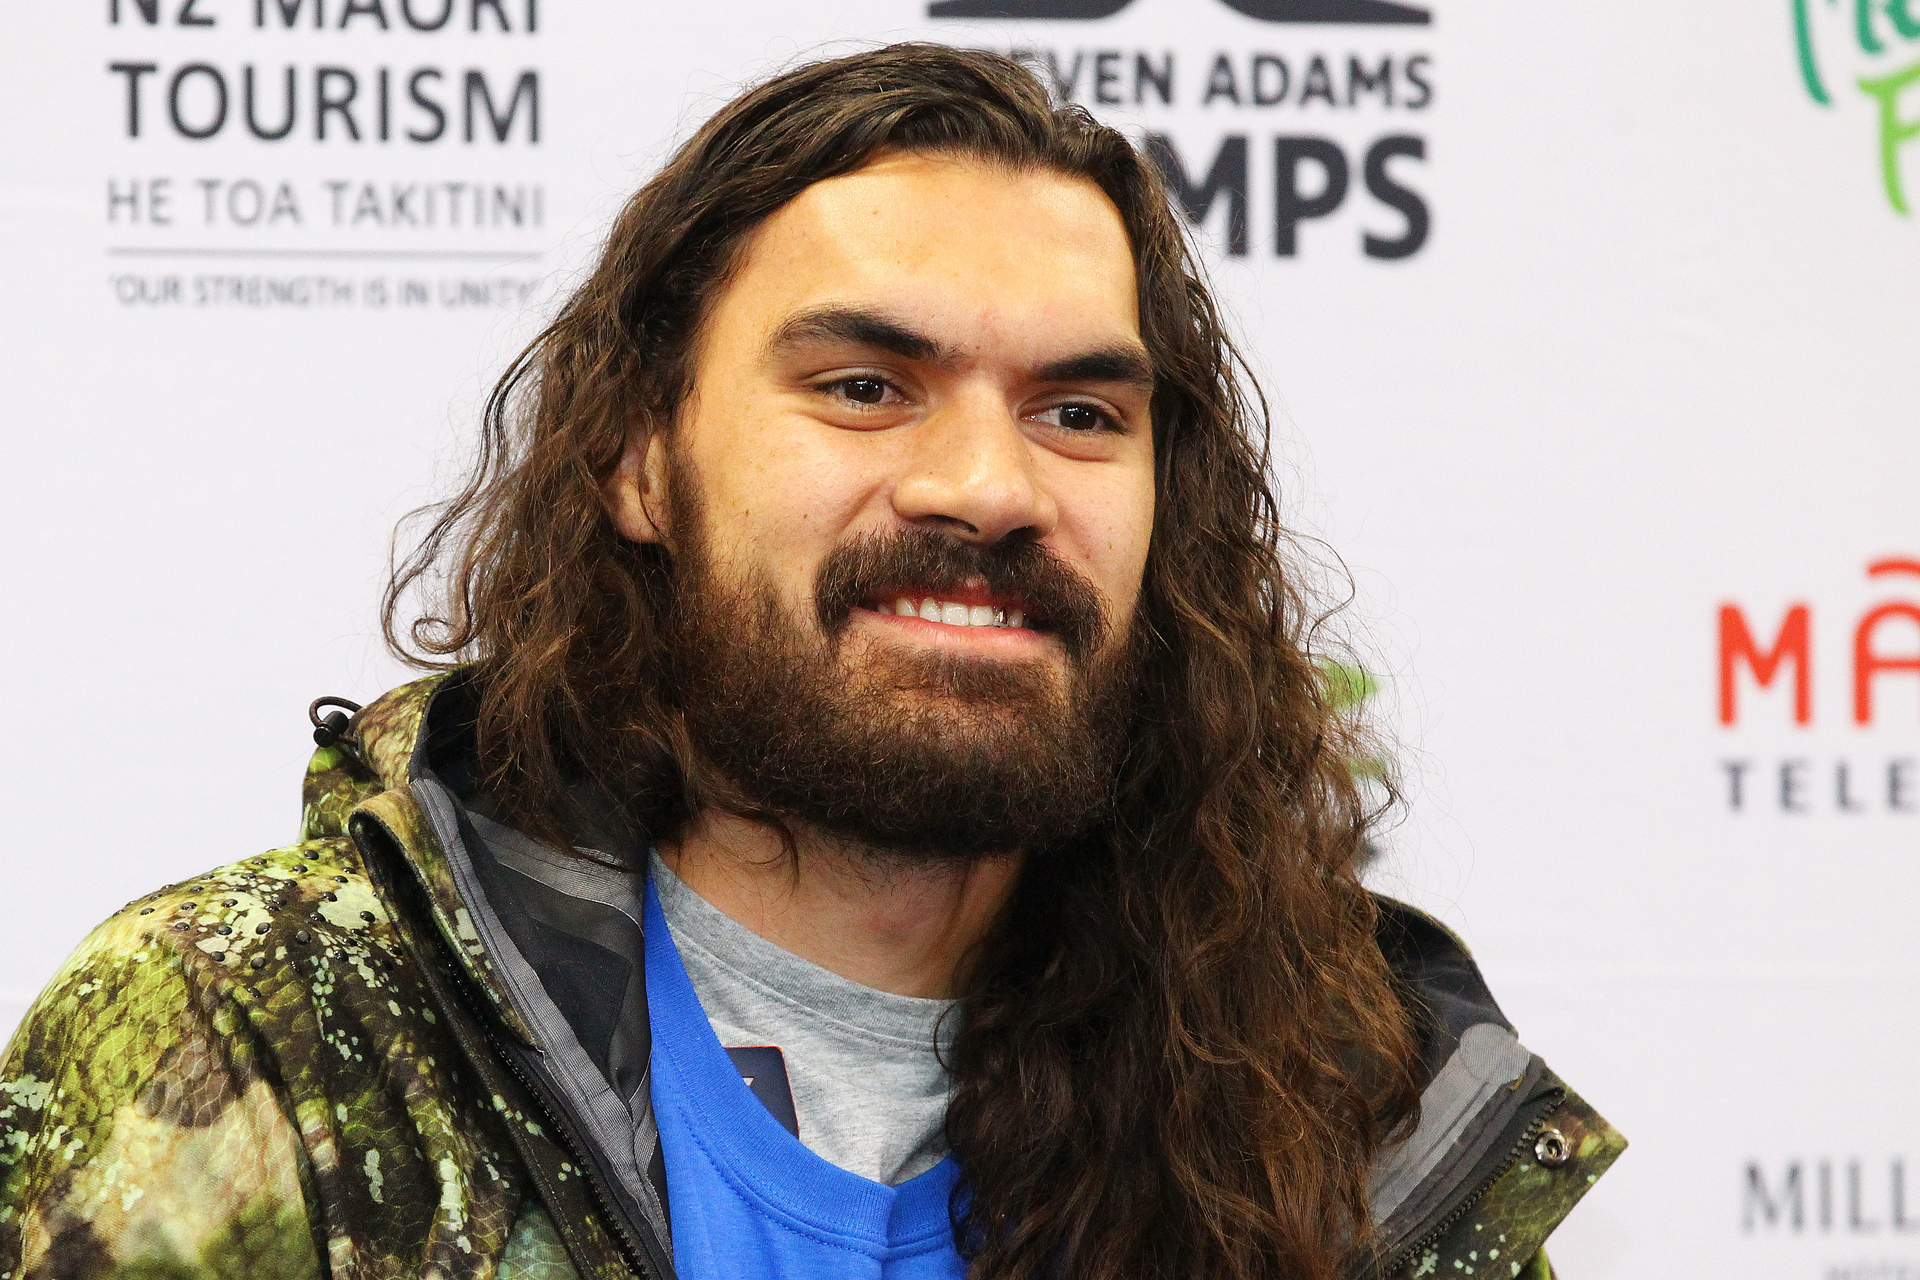 Steven Adams: the gold-toothed caveman who remade the Oklahoma City Thunder, Oklahoma City Thunder